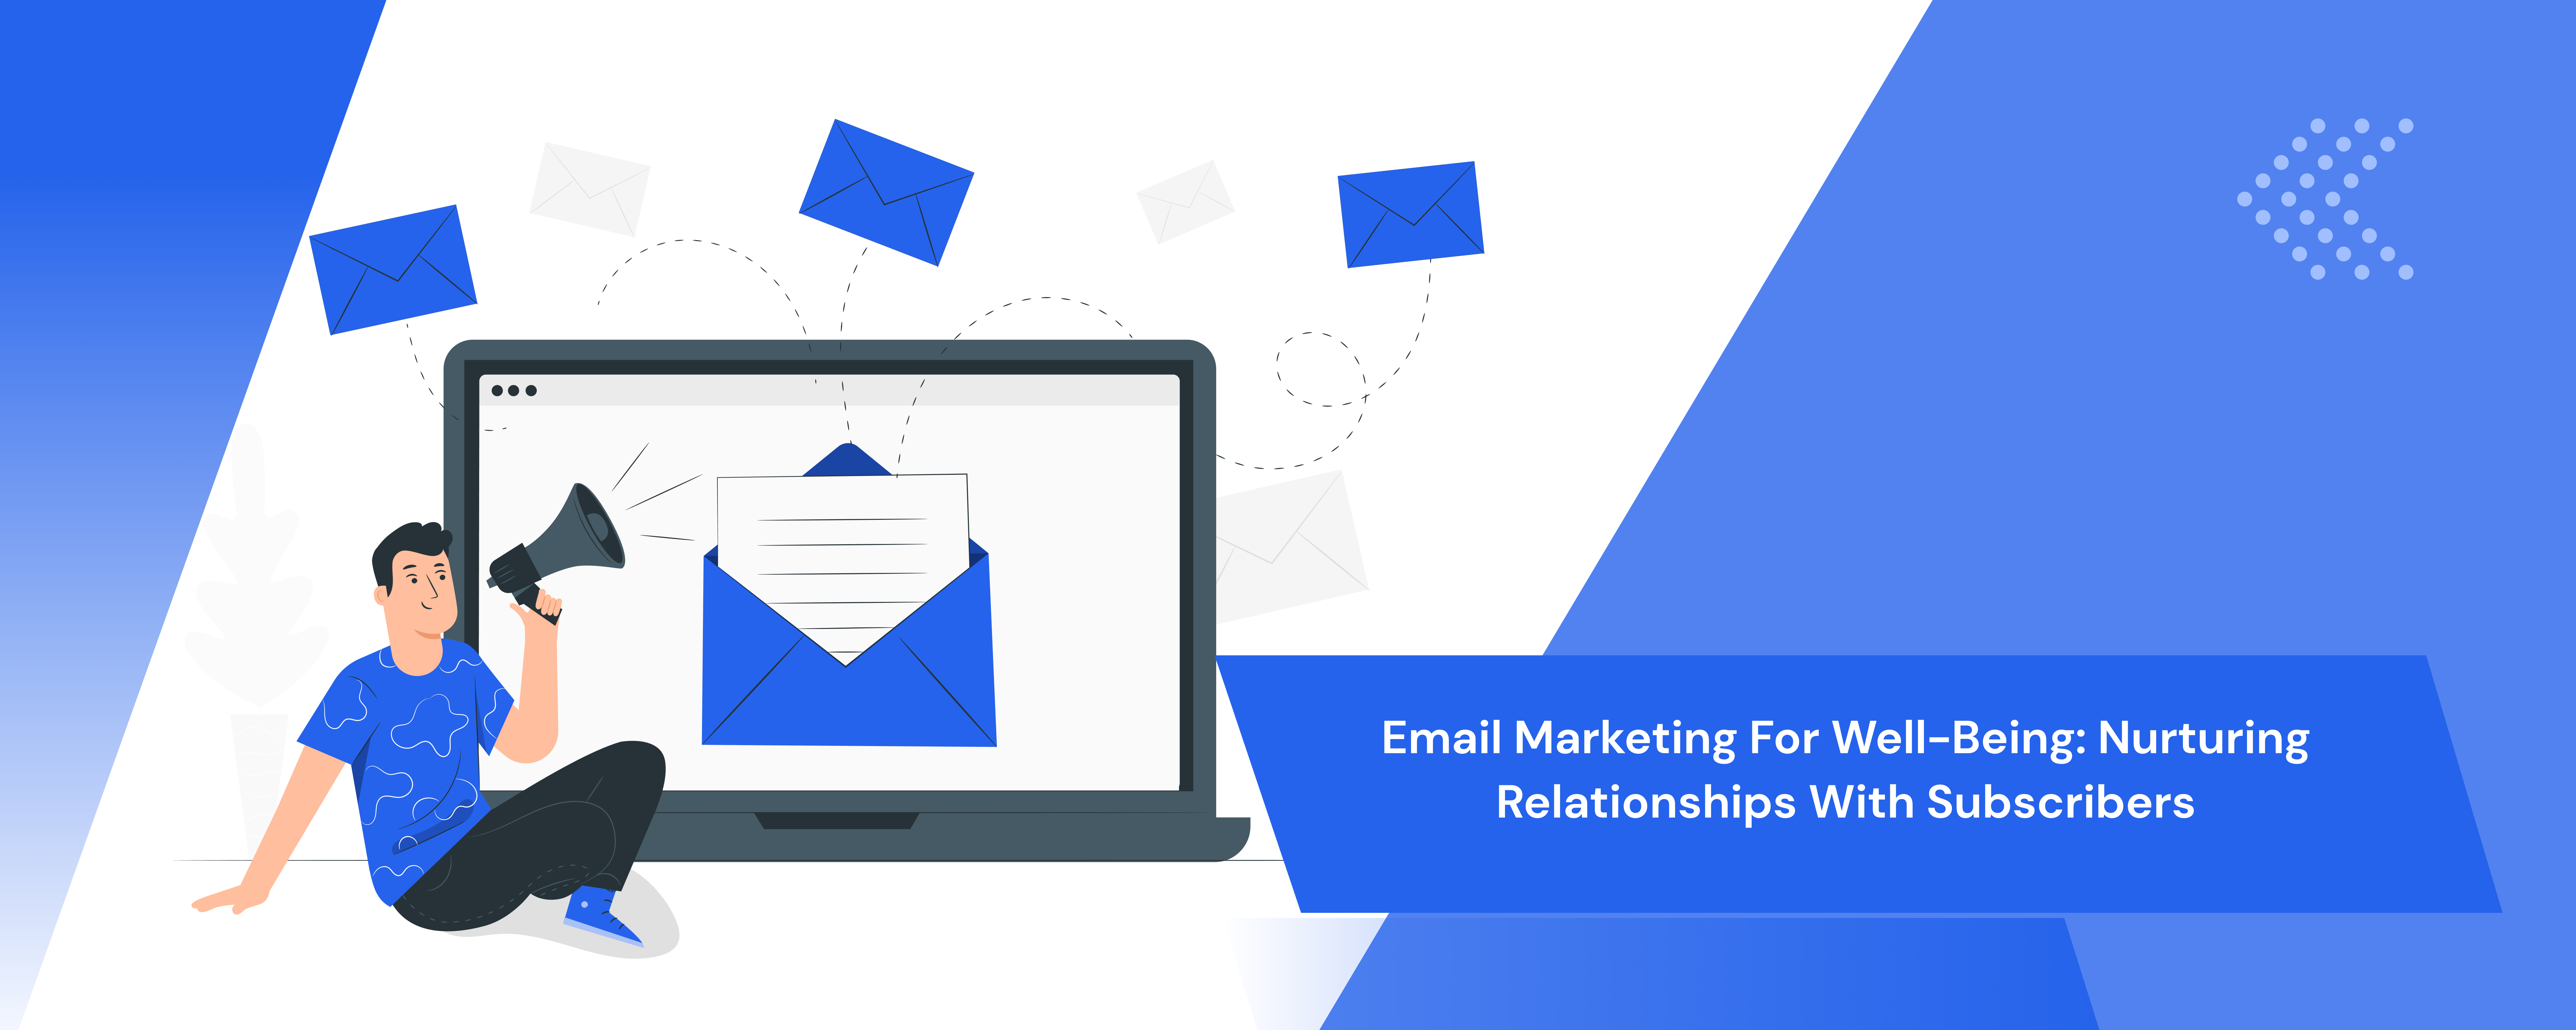 Email Marketing for Well-Being: Nurturing Relationships with Subscribers